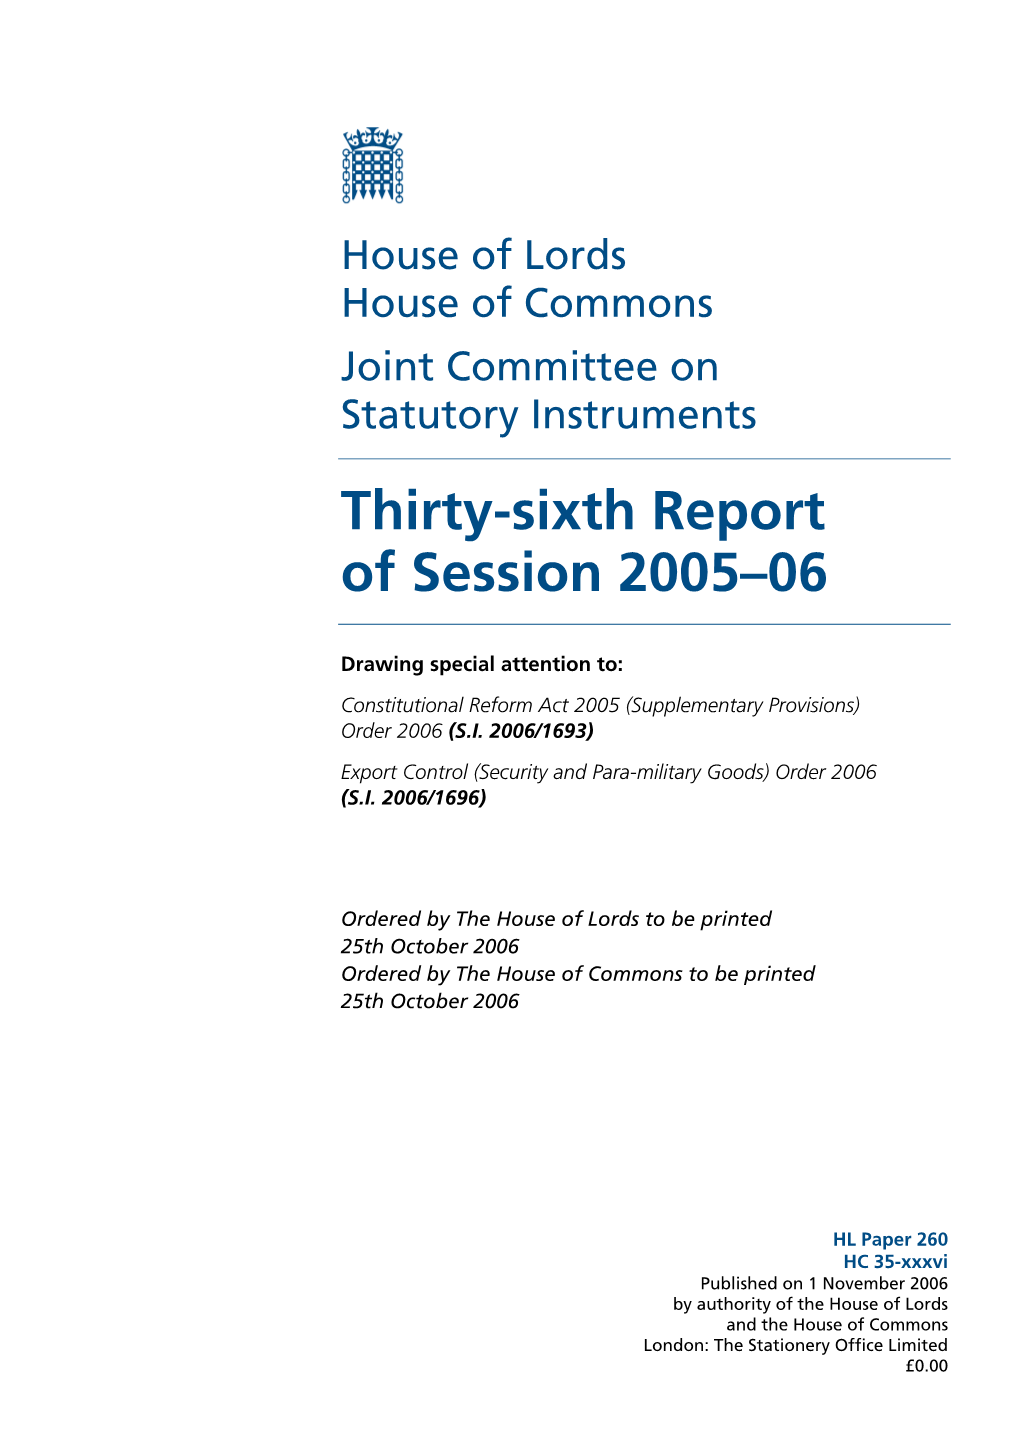 Thirty-Sixth Report of Session 2005–06